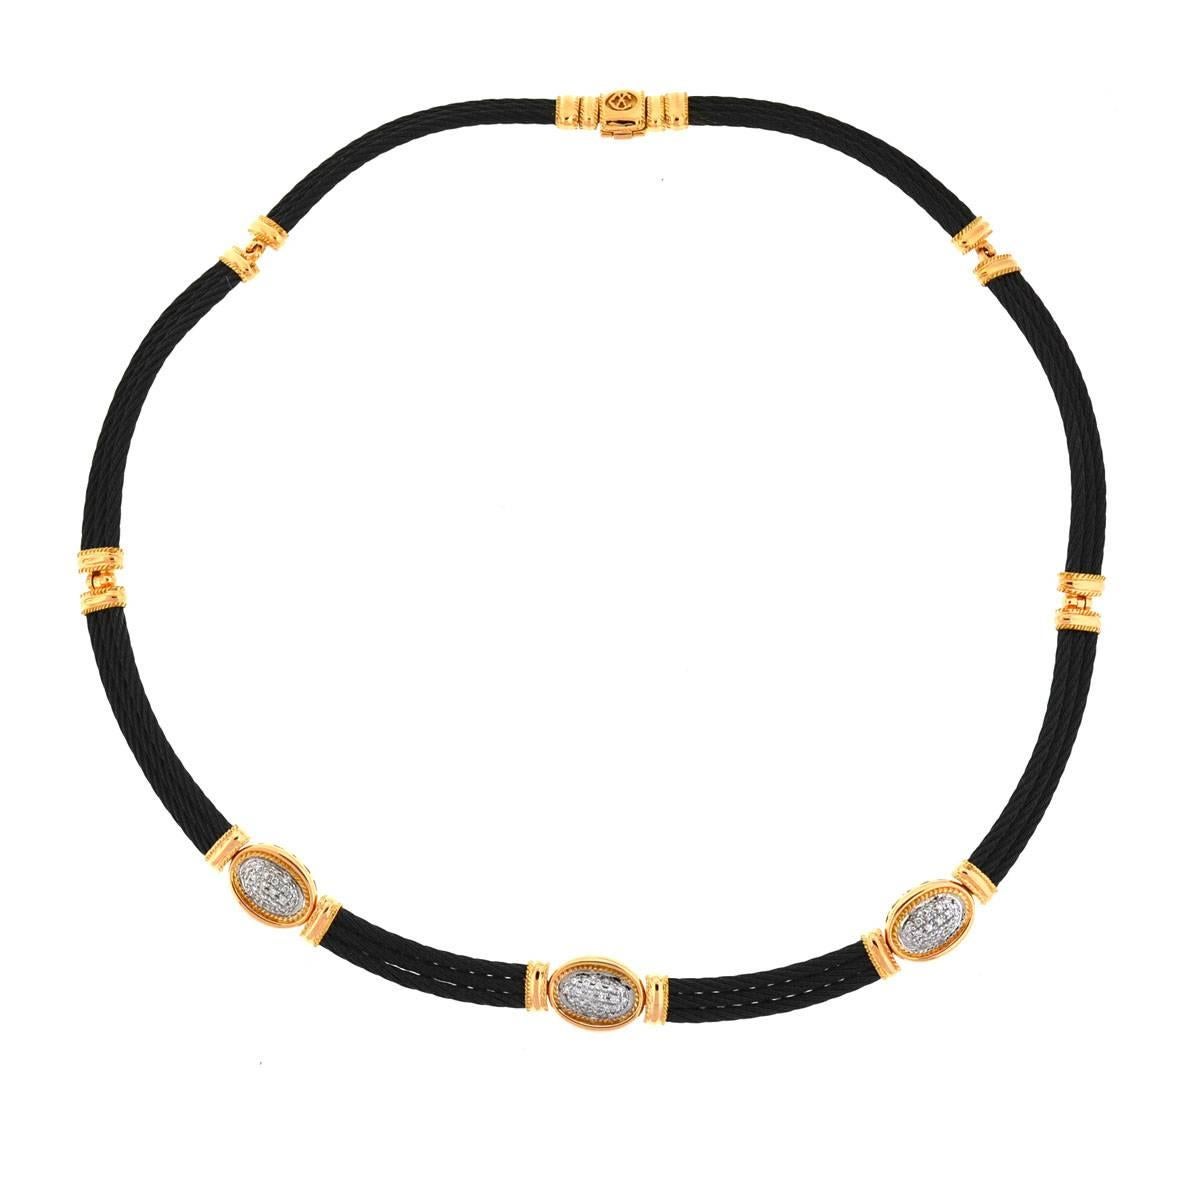 Company - Charriol
Style - Flamme Blanche Choker Necklace
Metal - 18k Rose Gold and 3 Row Black cord
Length - Approx. 16